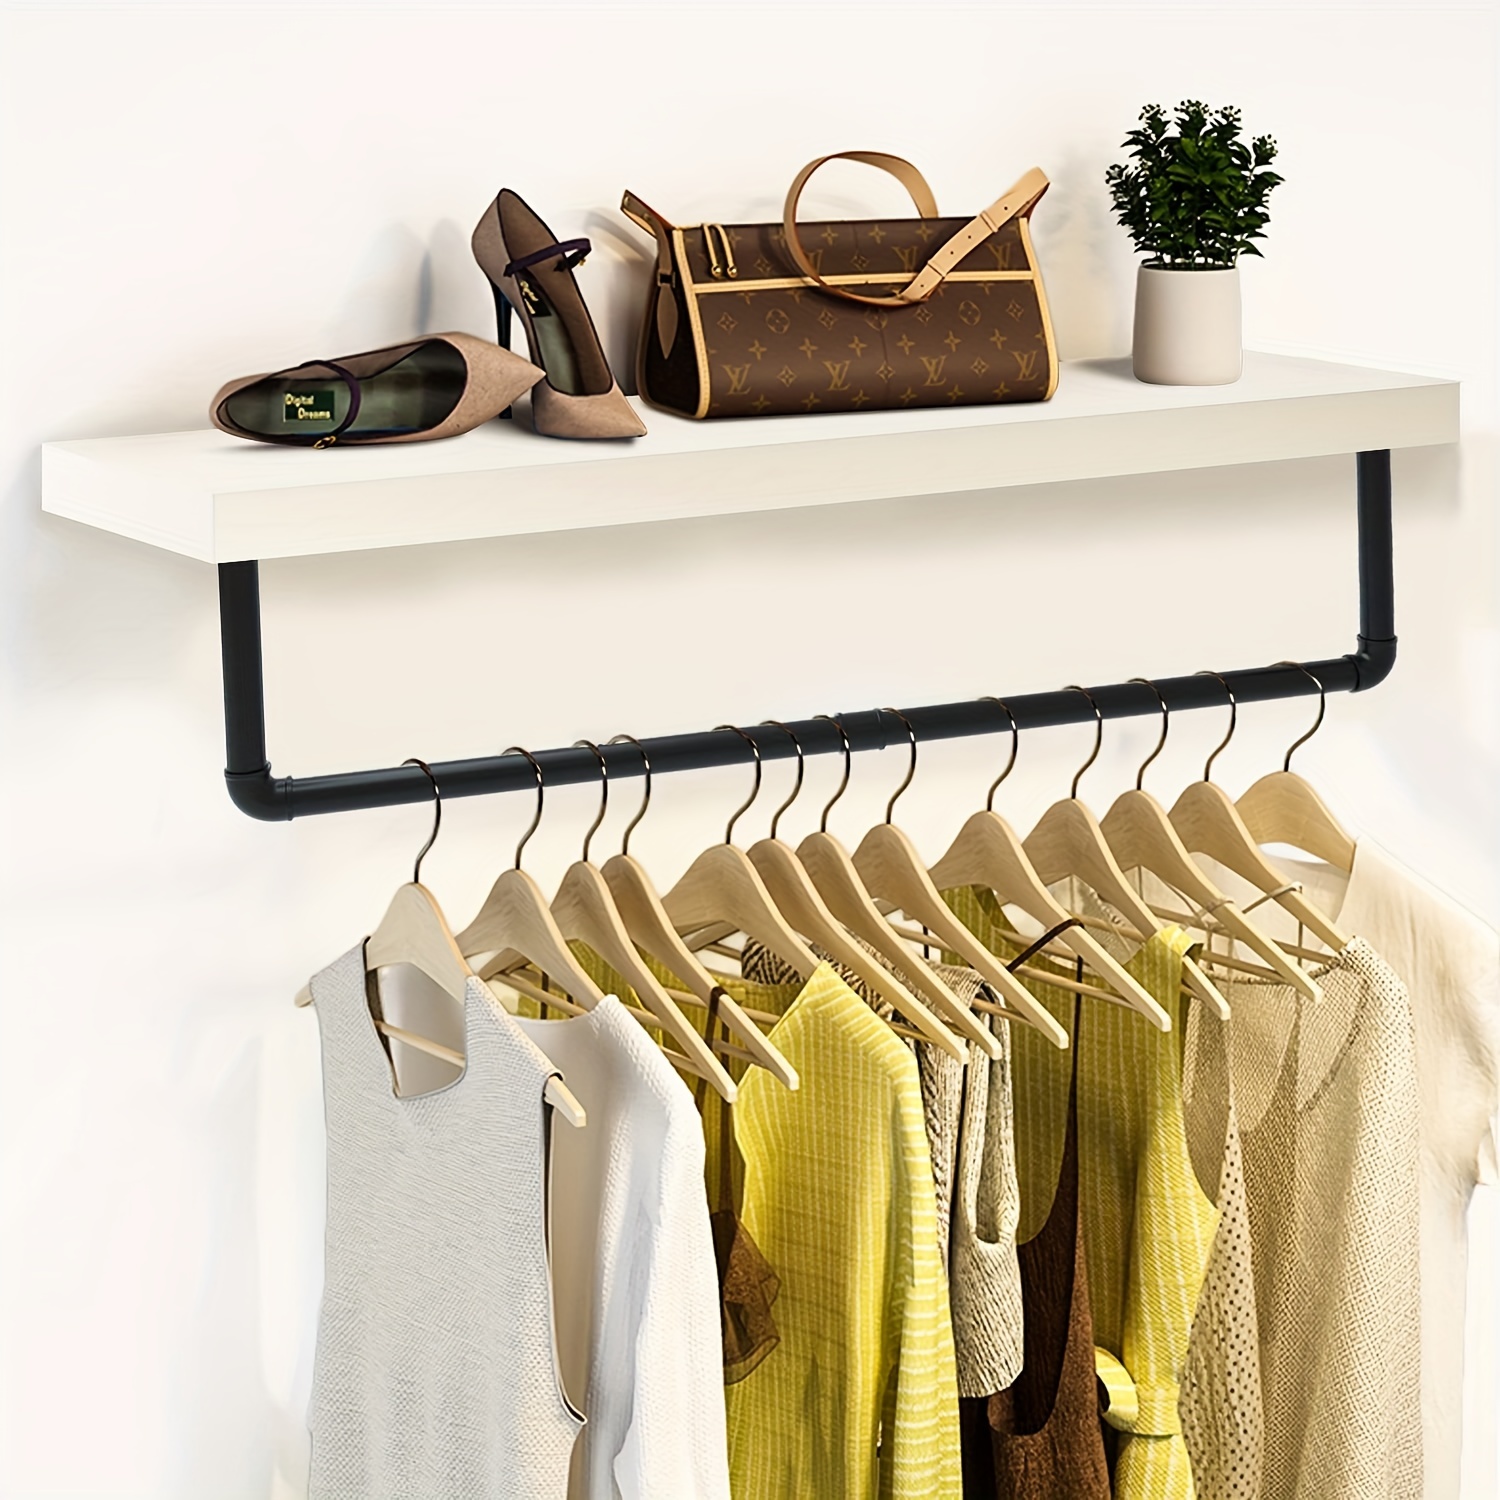 Iron Clothes Rack Hangers with Wood Shelves Heavy Duty Garment